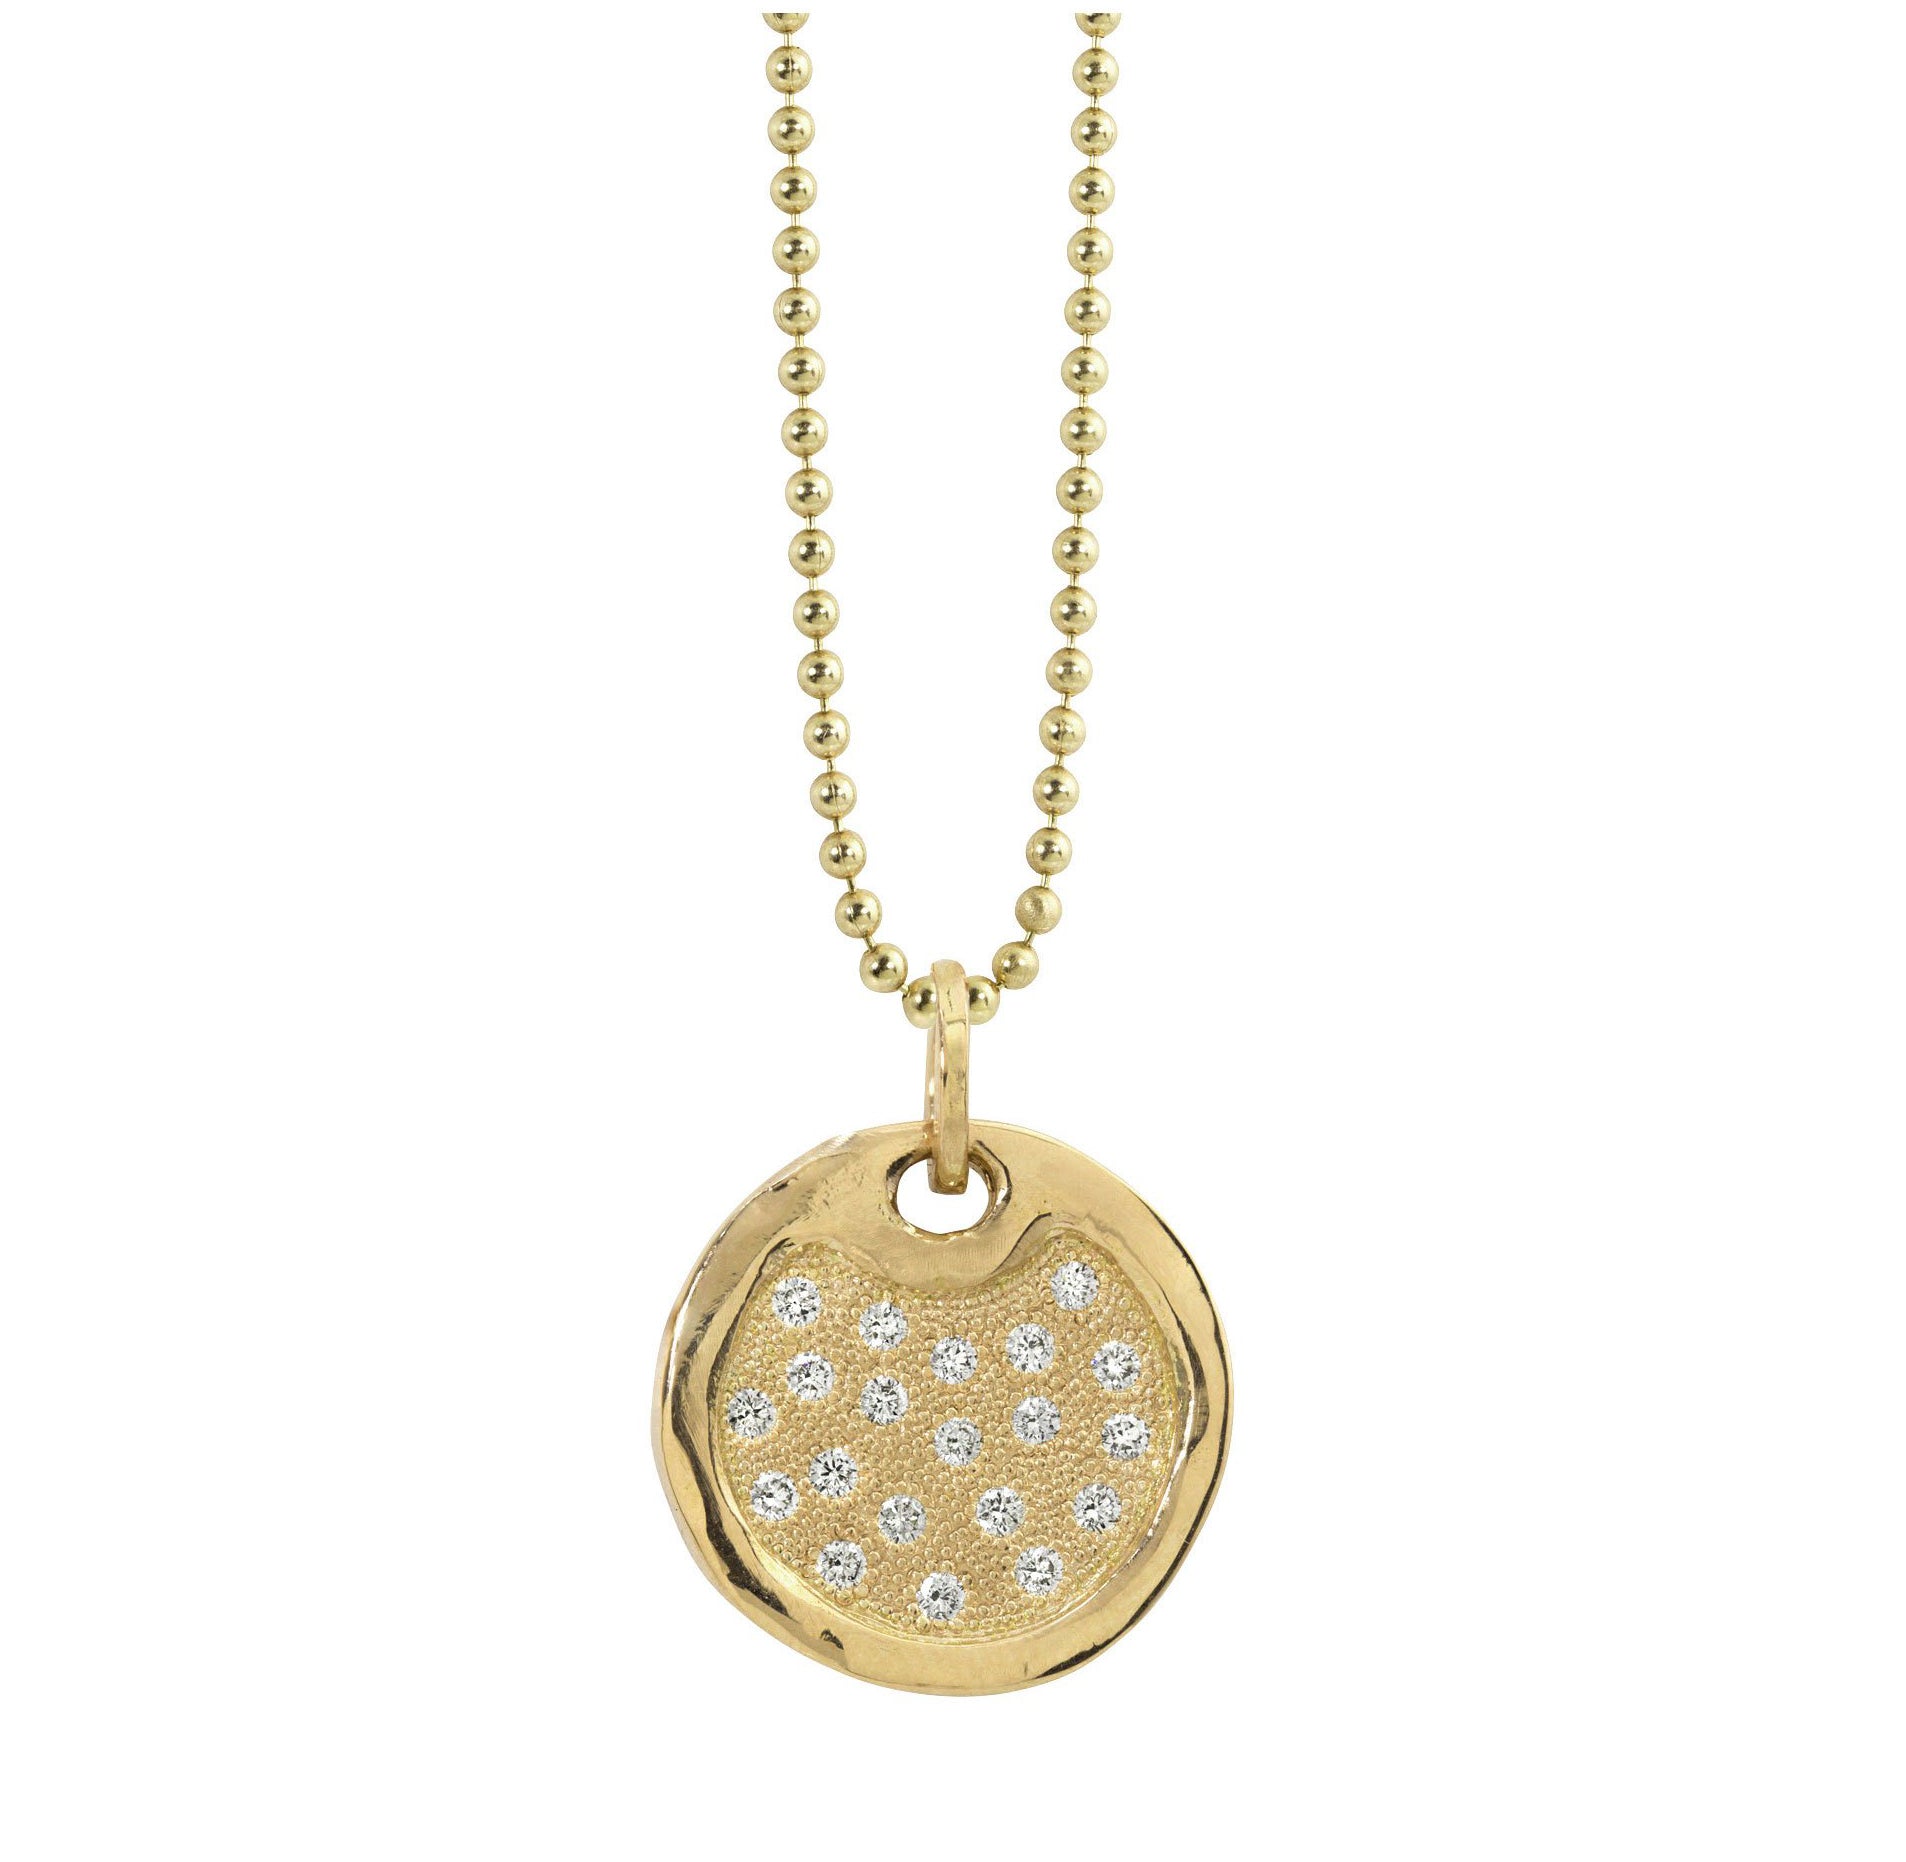 14k yellow gold large DENA pendant with scattered diamonds